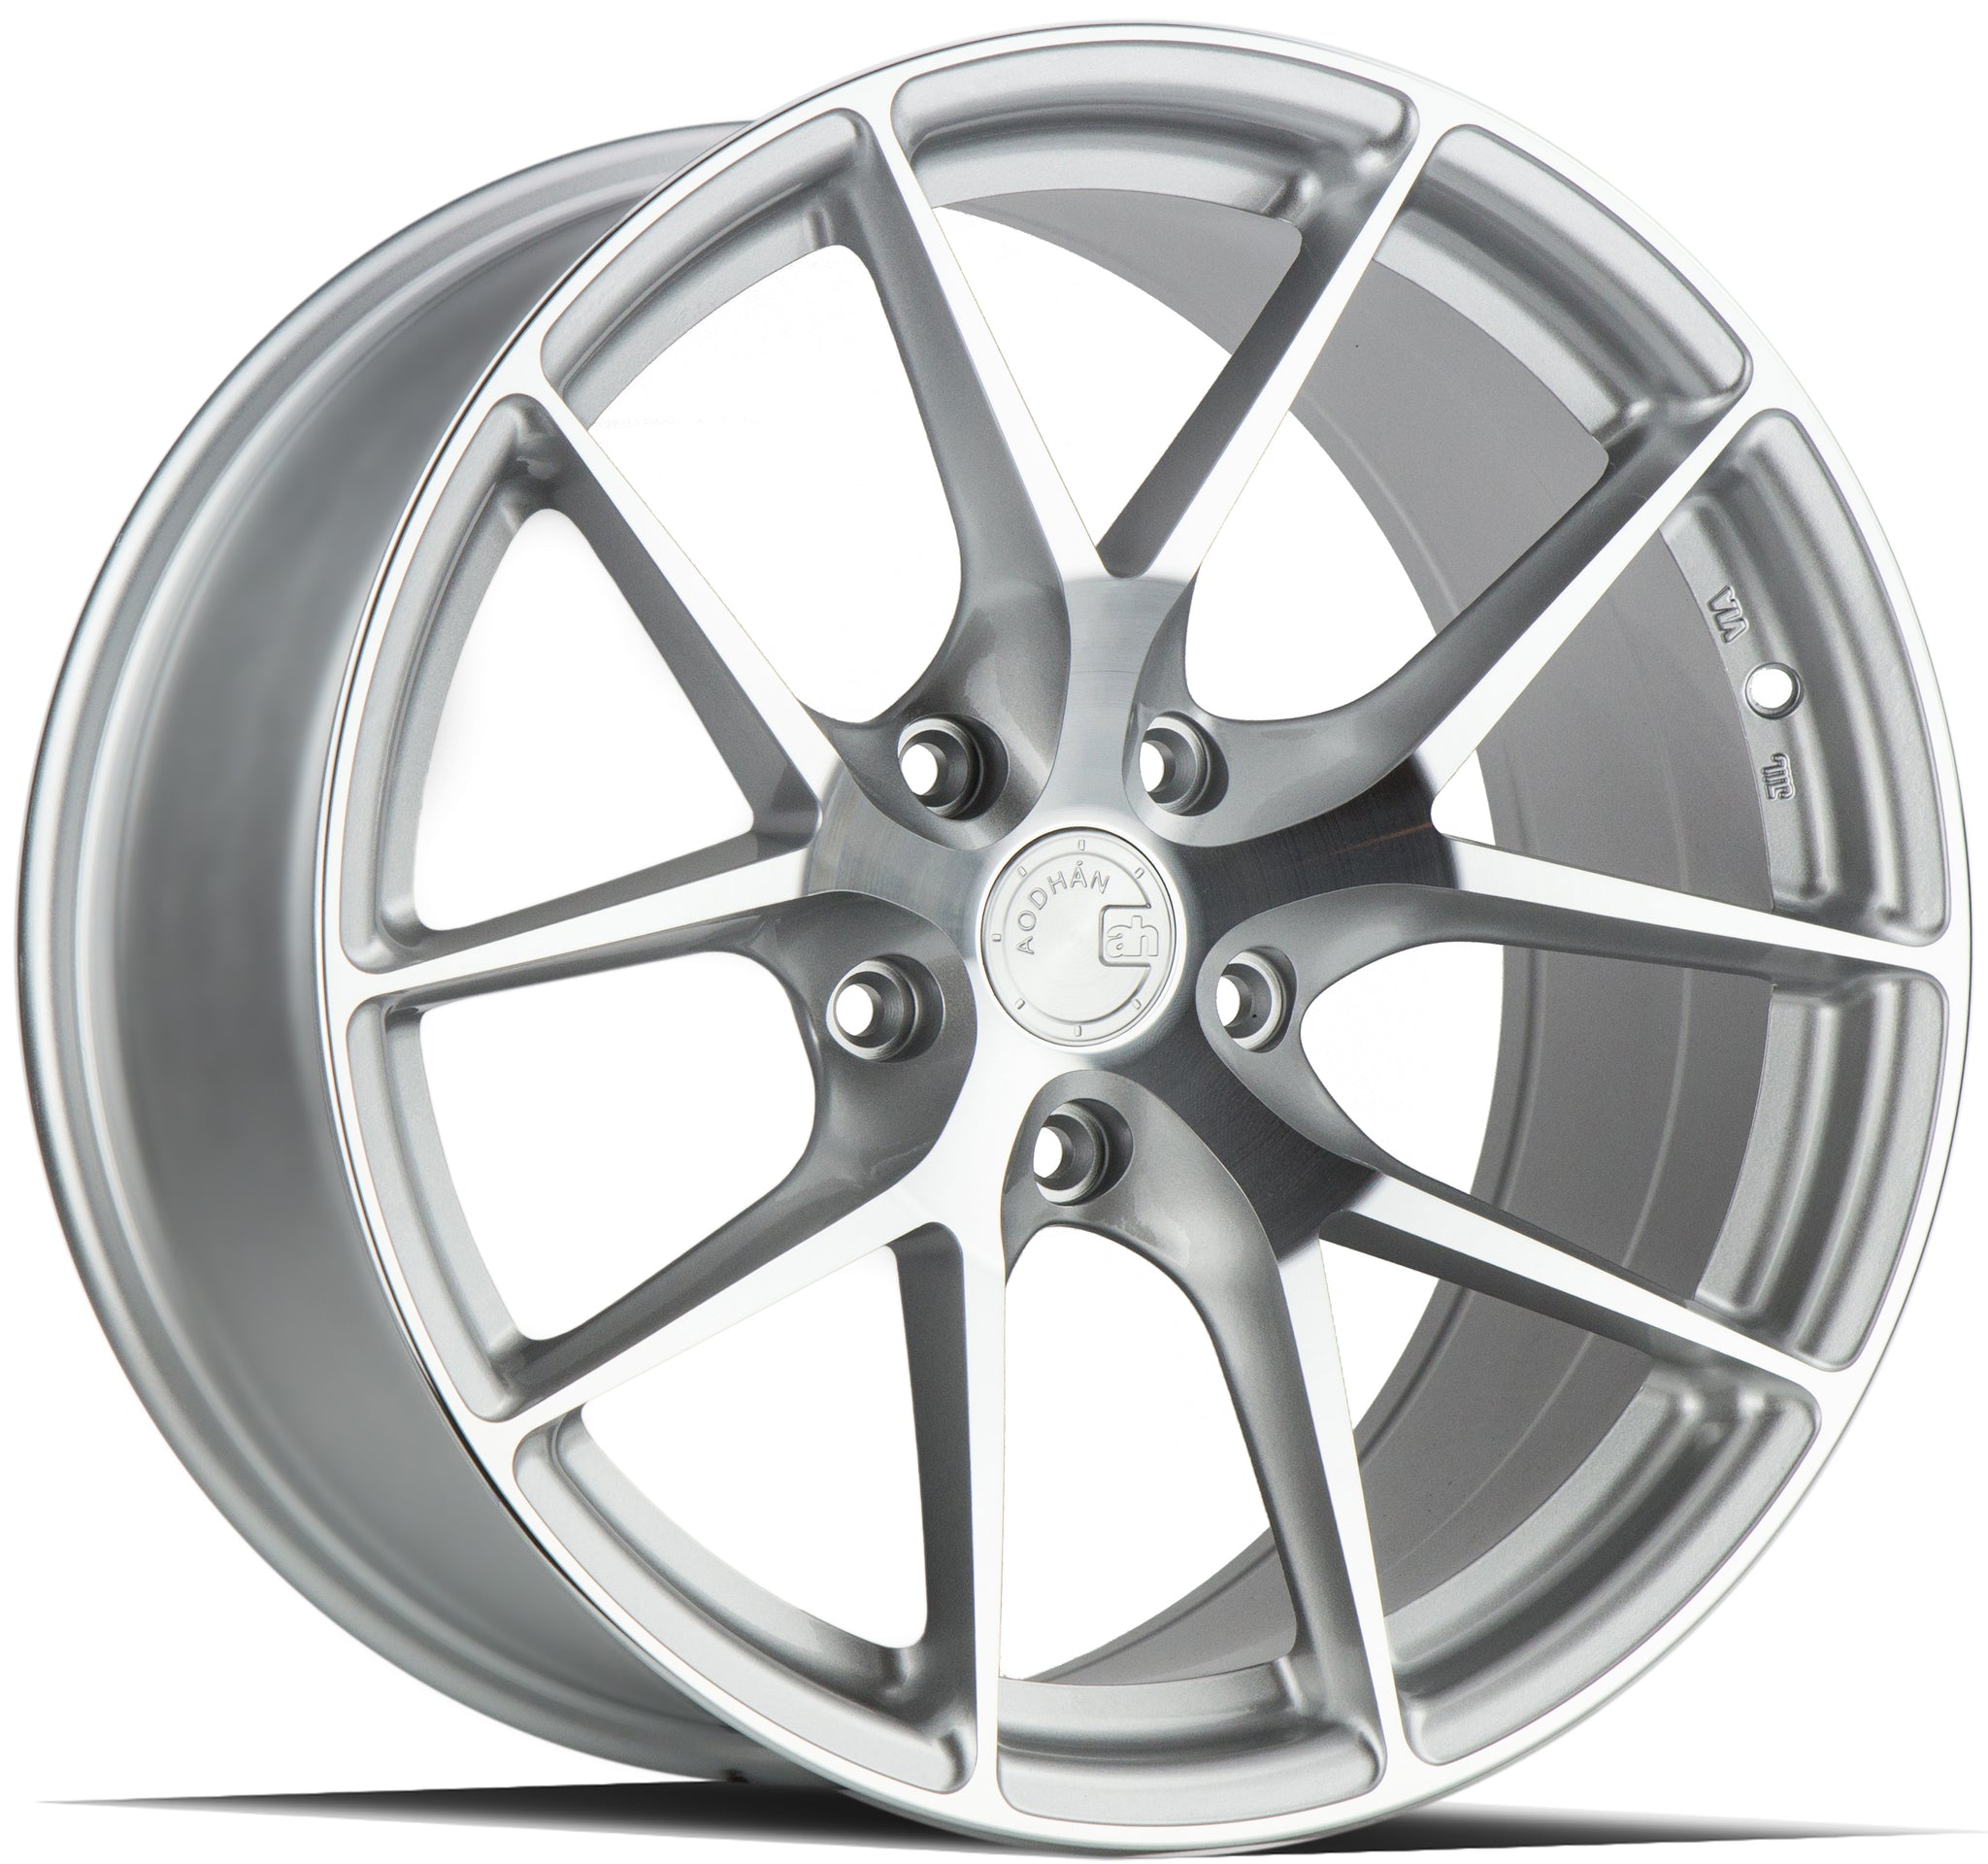 Aodhan AFF7 Gloss Silver Machined Face 20x10.5 5x114.3 +35